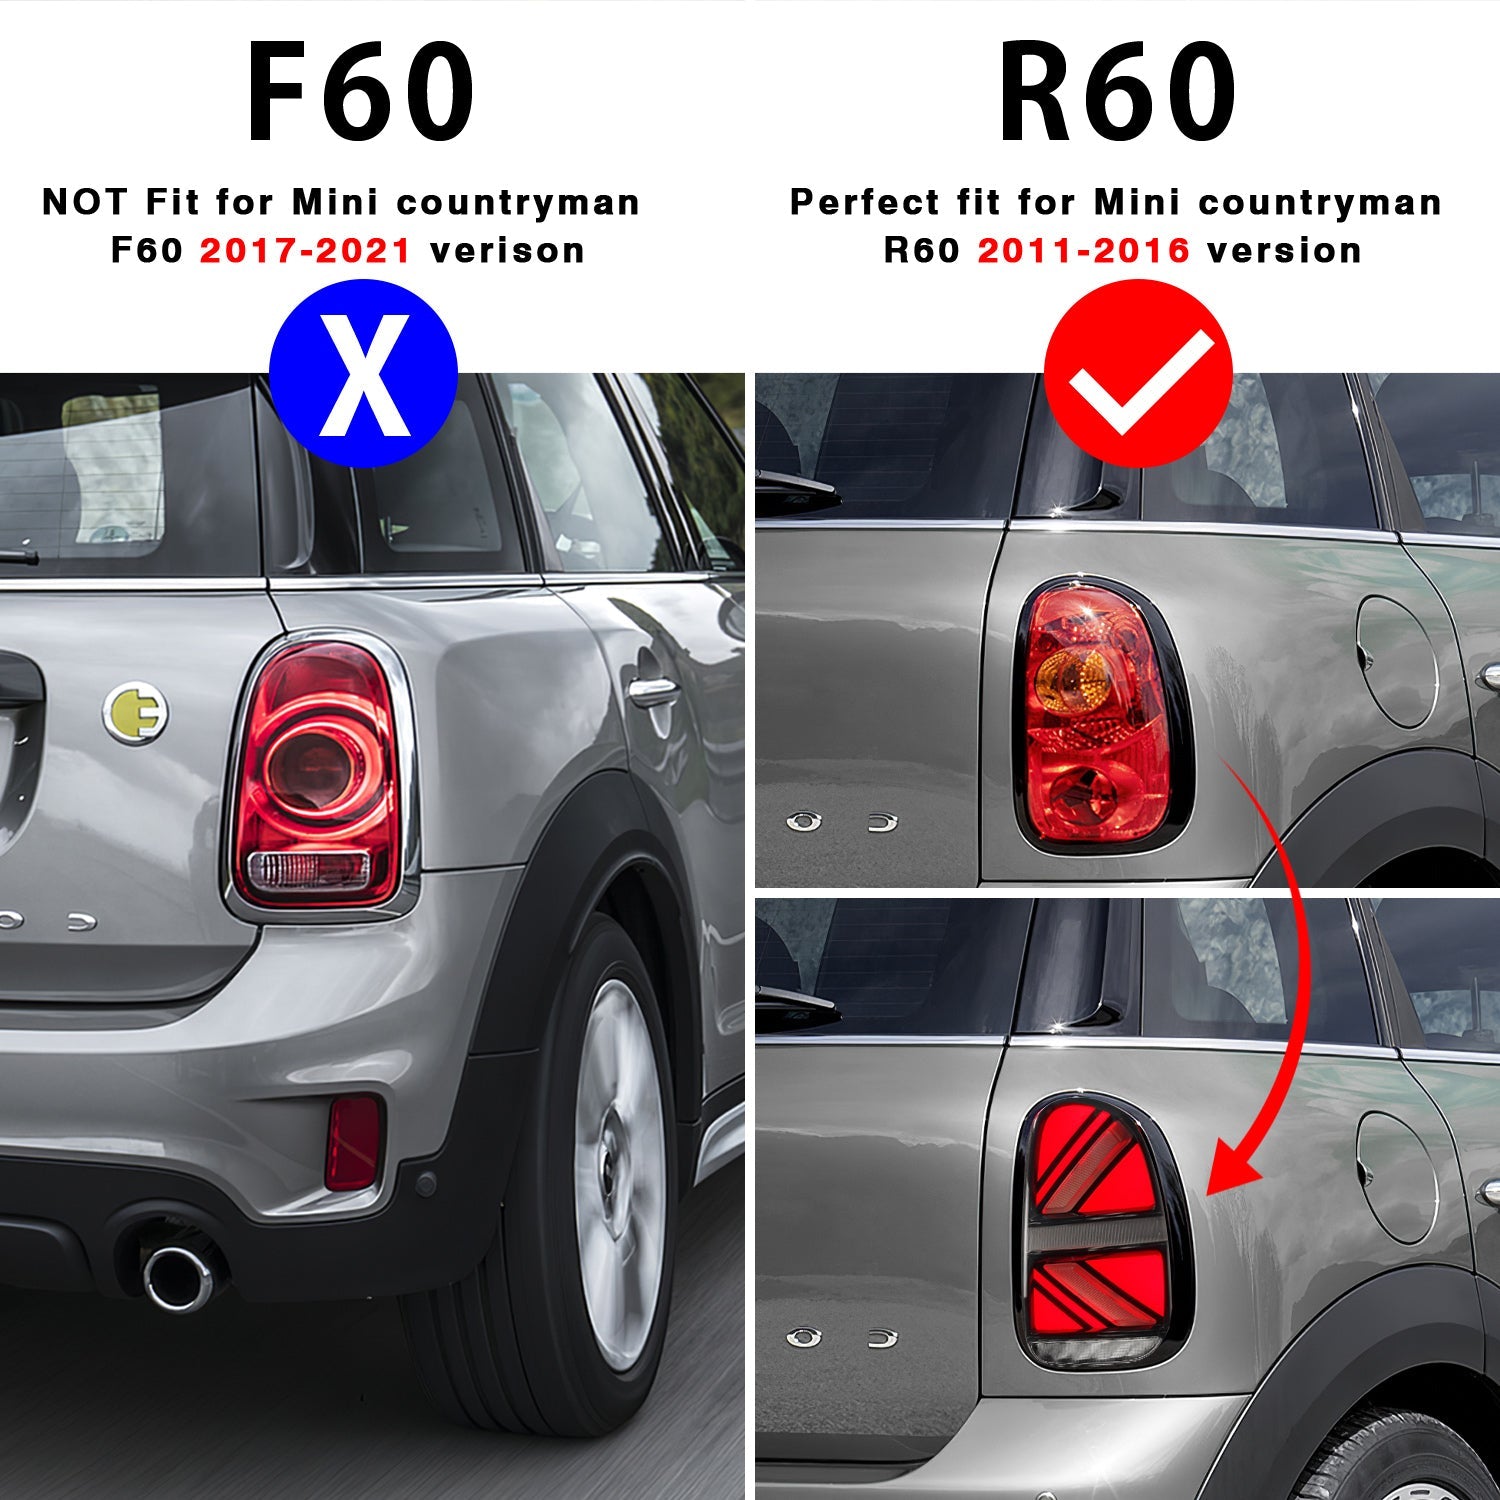 MINI 60 Years Edition: Union Jack taillights shine brightly thanks